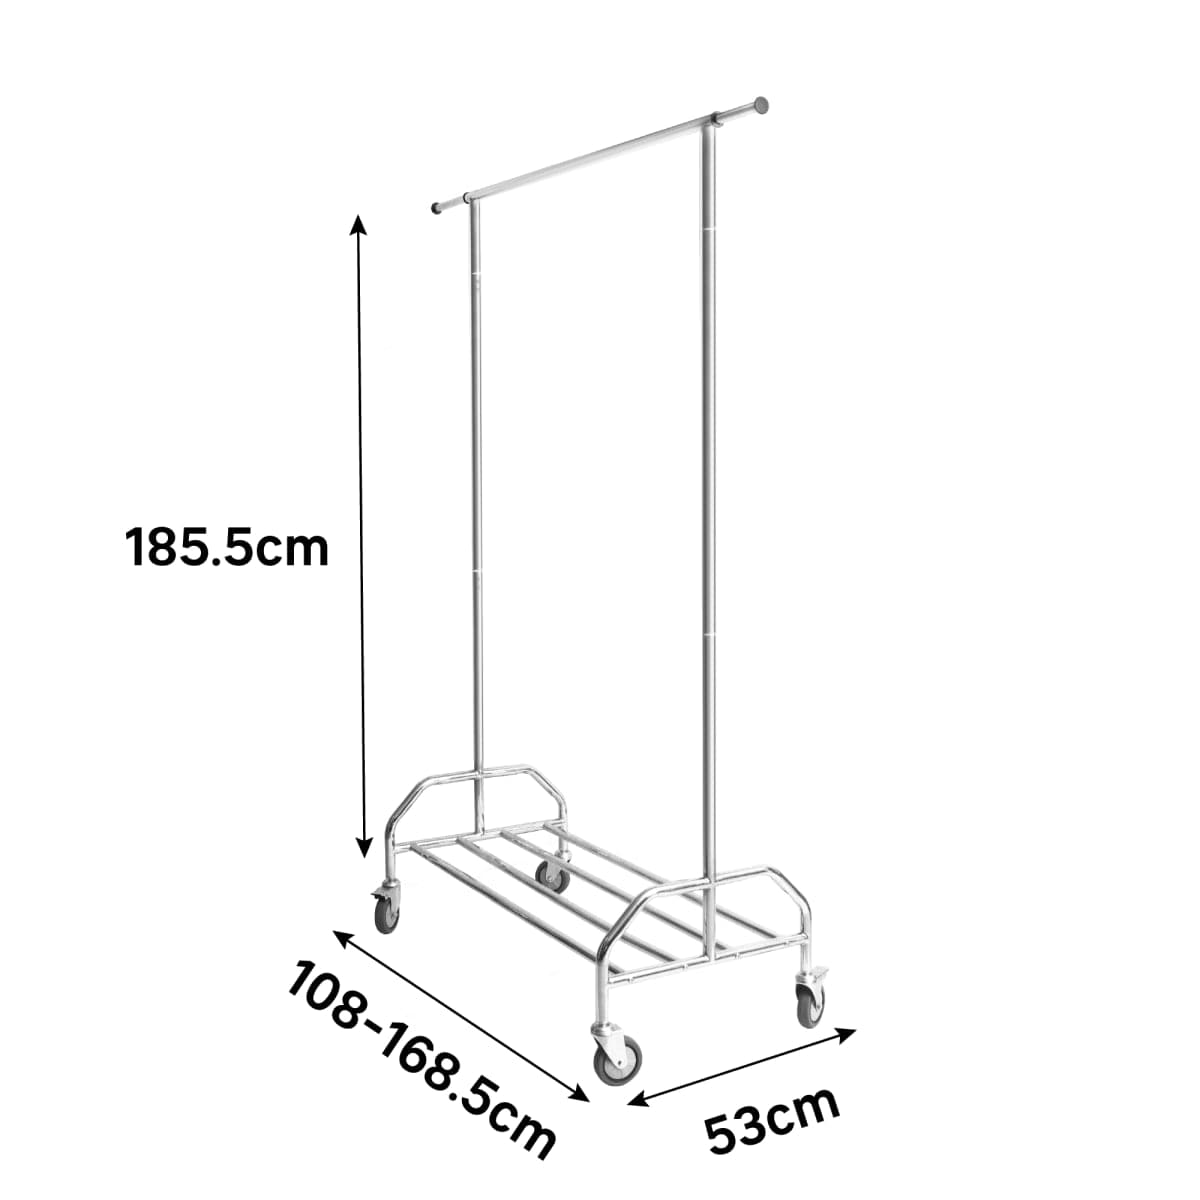 SPACEO ONE BAR METAL STAND WITH WHEELS W108CM X D53CM X H181CM - best price from Maltashopper.com BR410520312